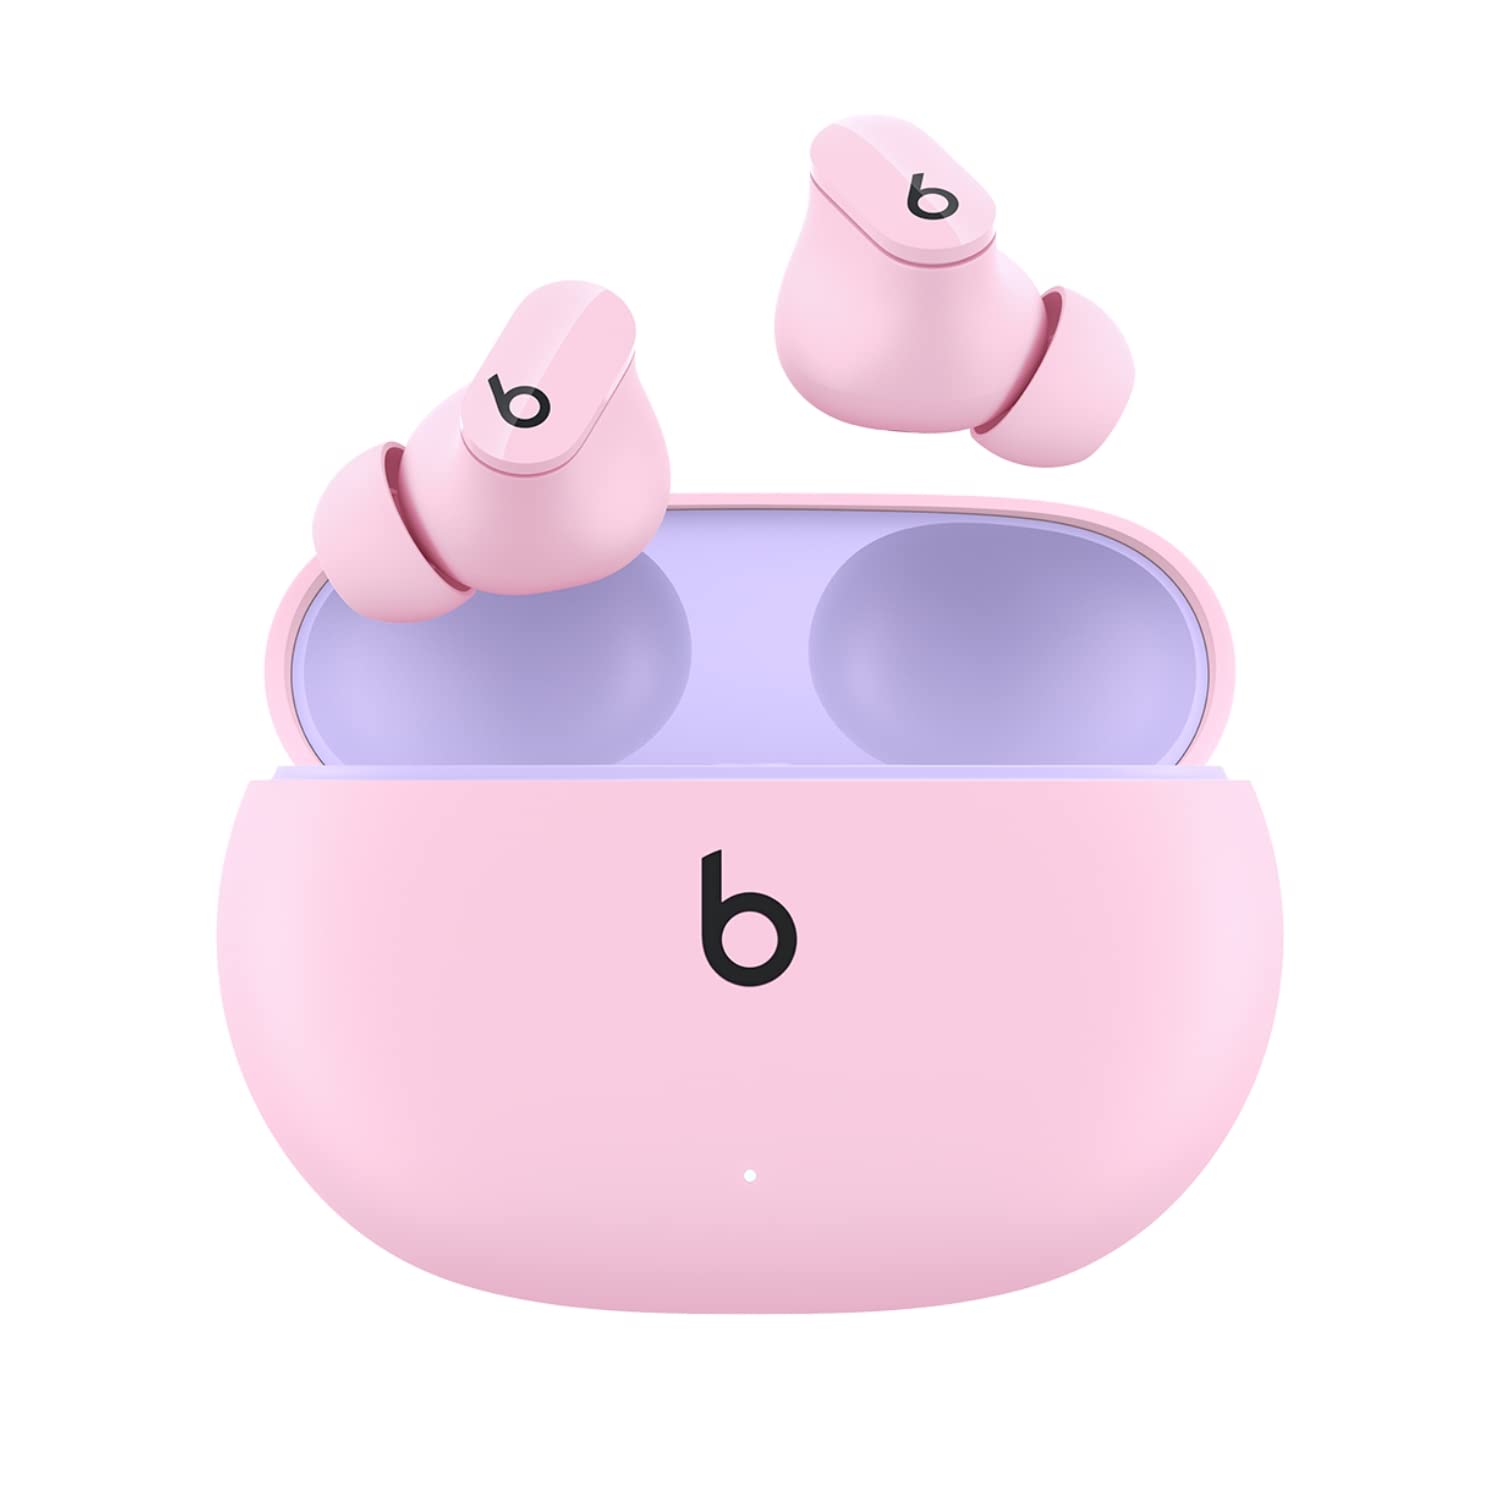 Beats Studio Buds - True Wireless Noise Cancelling Earbuds - Compatibl